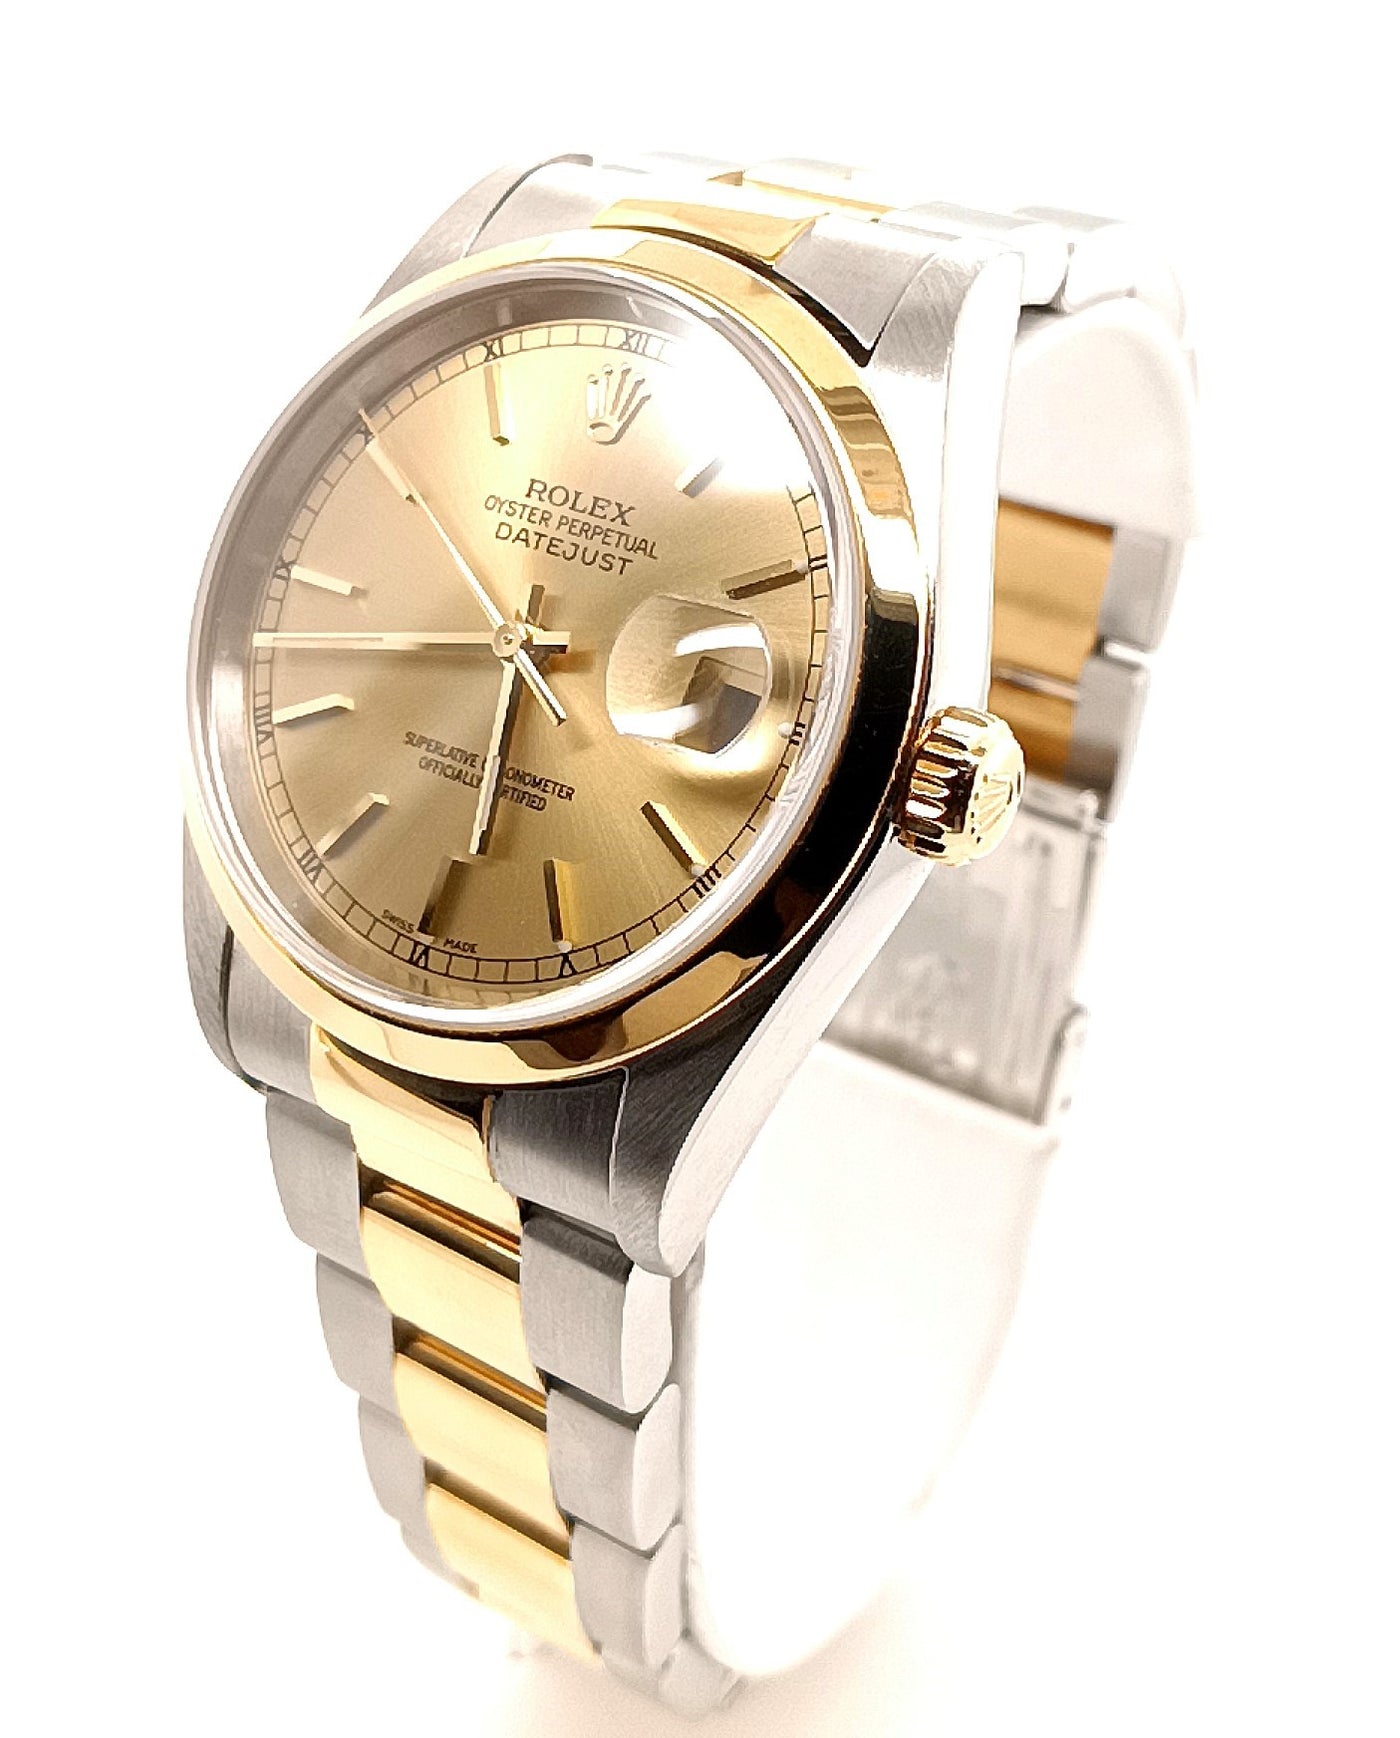 Gent's 18K Gold & Stainless Pre-owned Rolex Datejust with Champagne Dial, Circa 2001